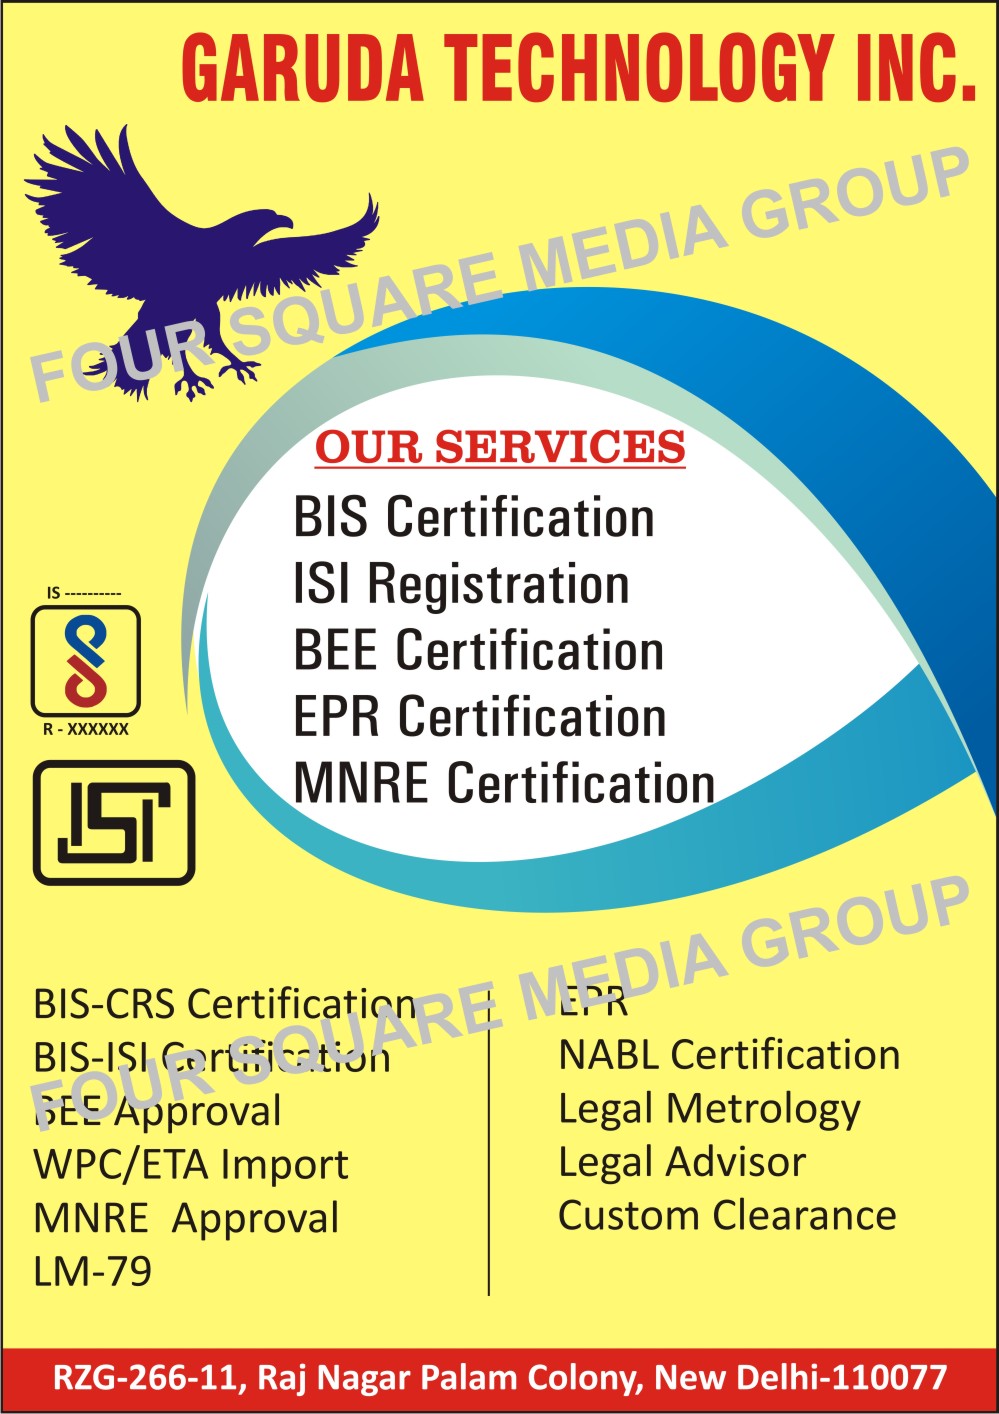 BIS Certification Services, ISI Registration Services, BEE Certification Services, EPR Certification Services, MNRE Certification Services, CRS Certification Services, WPC Import Services, ETA Import Services, NABL Certification Services, Legal Metrology Services, Legal Advisors, Custom Clearance Services, ISI Foreign Certifications, EPR Authorizations, BEE Star Certifications, WPC Approvals, ETA Approvals, Import Licences, MNRE Approvals, ISO Certifications, Trademark Registrations, NABL Certifications, Legal Metrologies